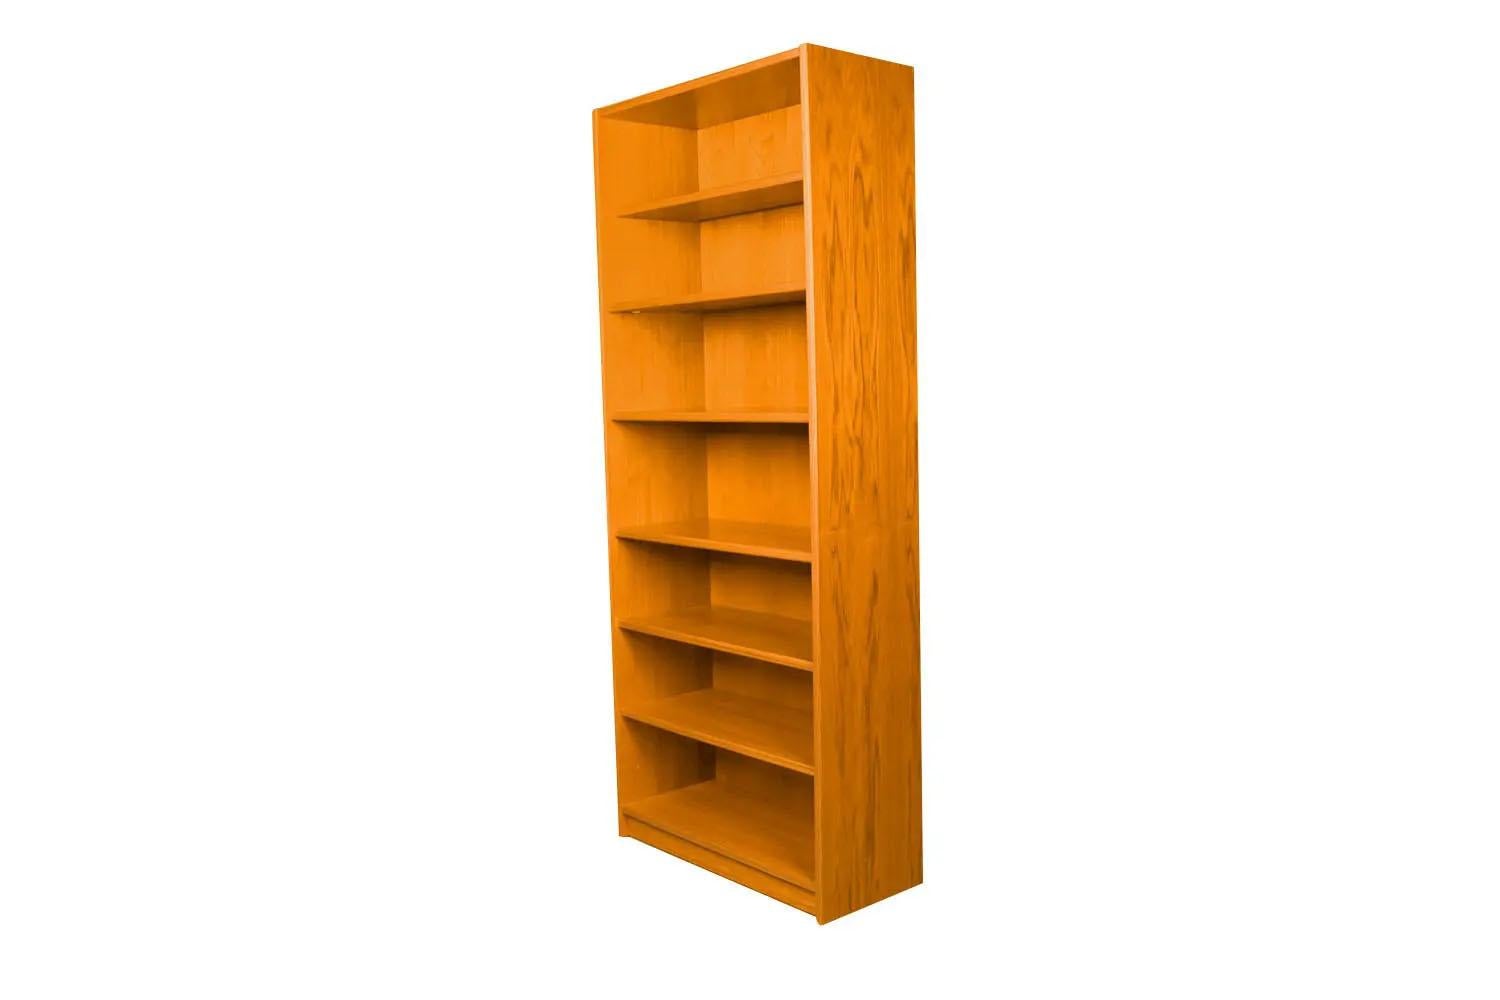 An exceptional teak tall bookcase made in Denmark. Gorgeous Mid-Century Modern Teak bookcase / tall bookshelf unit. Beautiful, minimalist, clean, straight lines. Features five and one stationary providing ample storage space. The top shelf is 11?